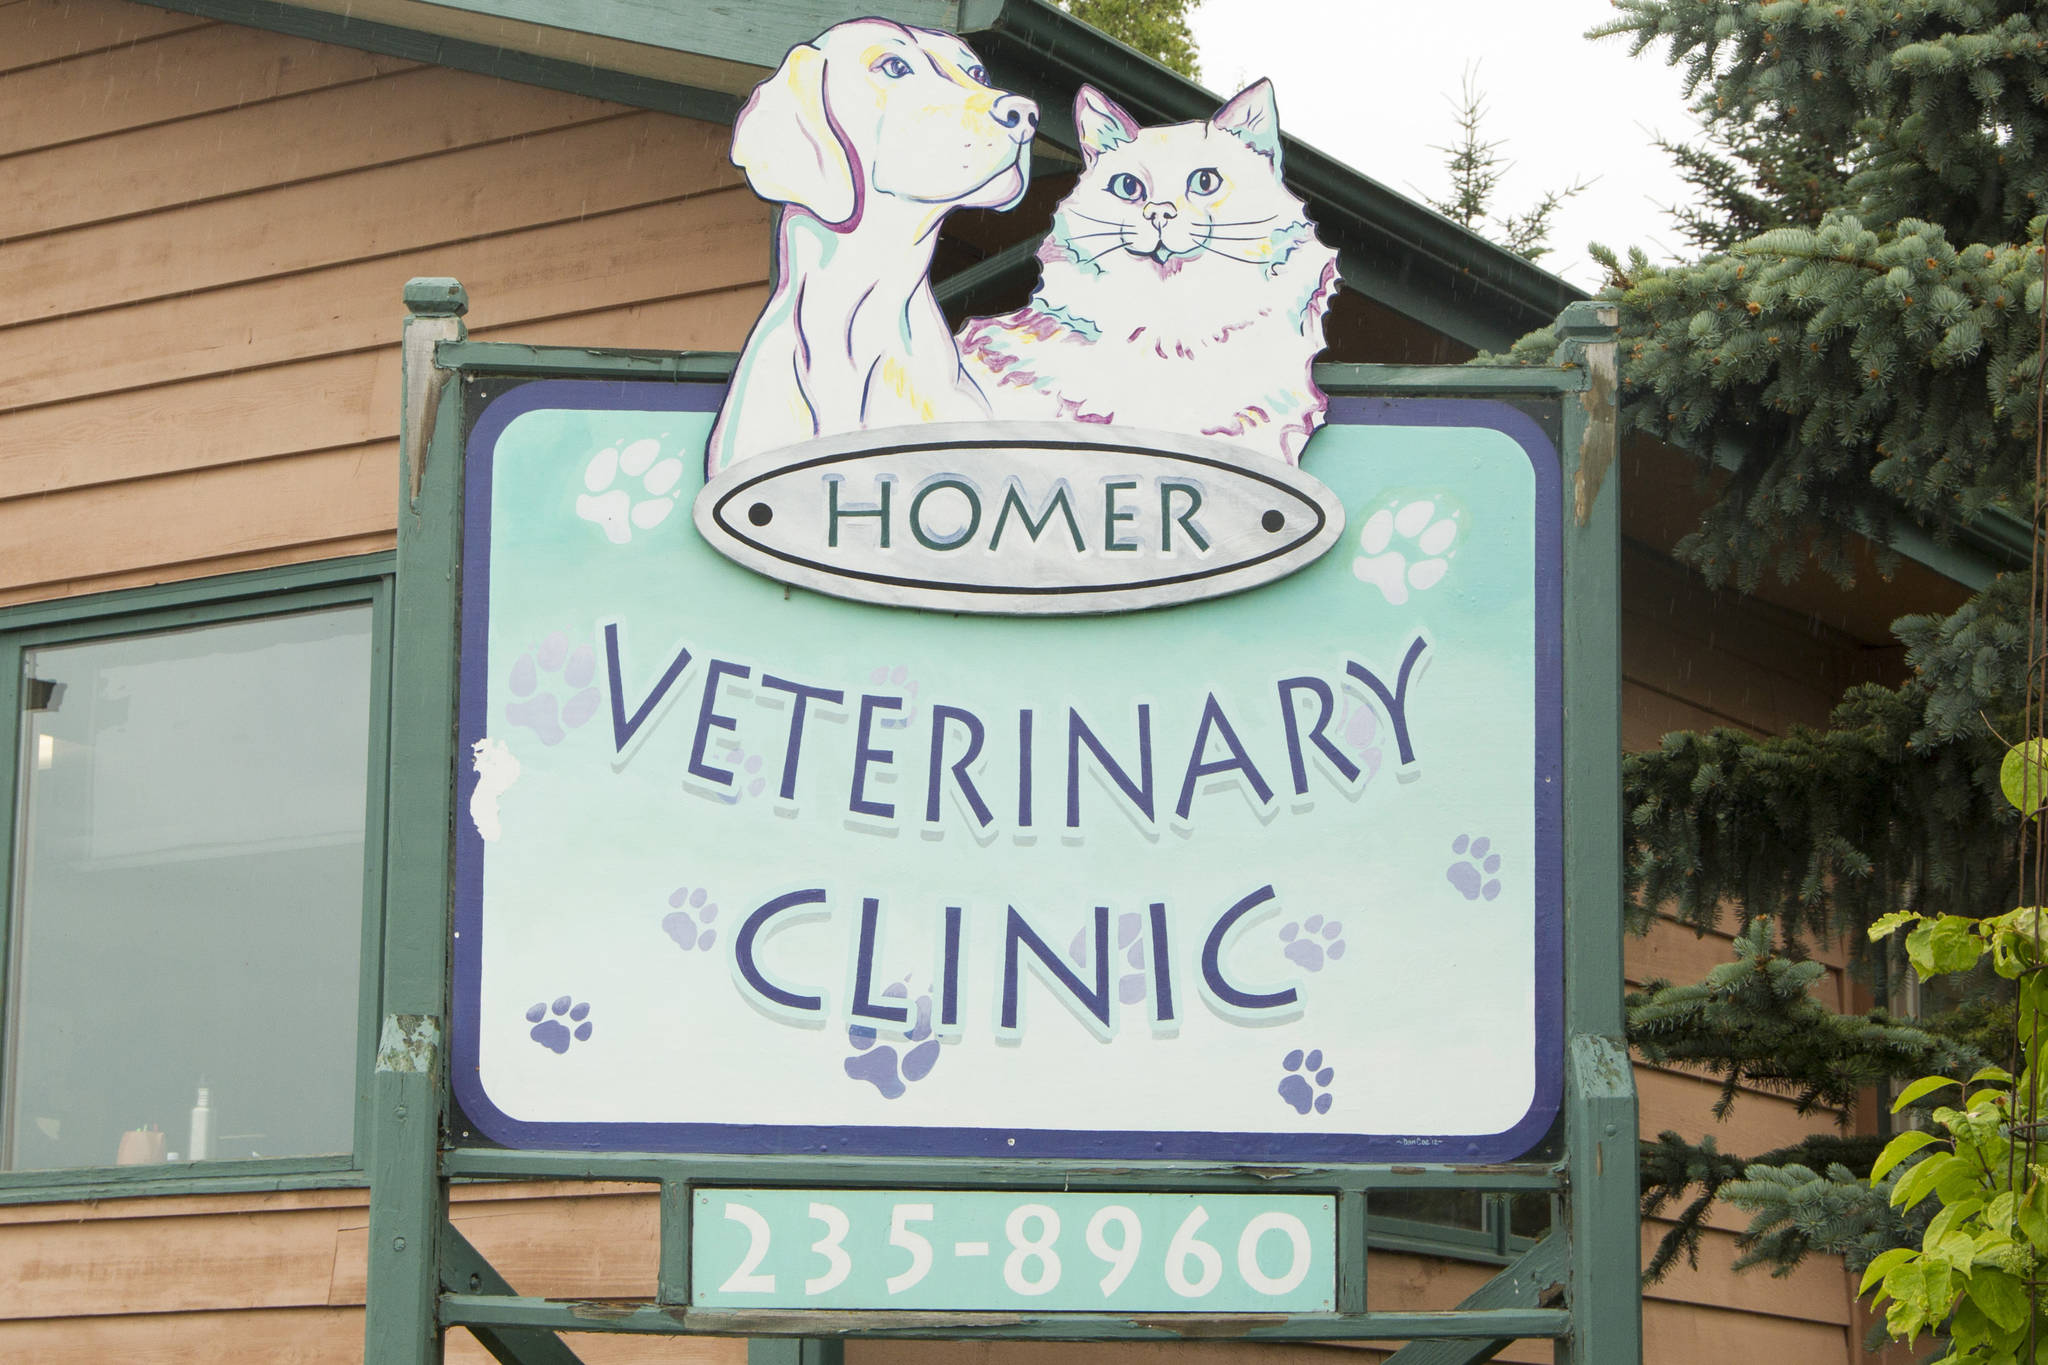 The Homer Veterinary Clinic is open Monday through Friday from 8 a.m. to 5:30 p.m.